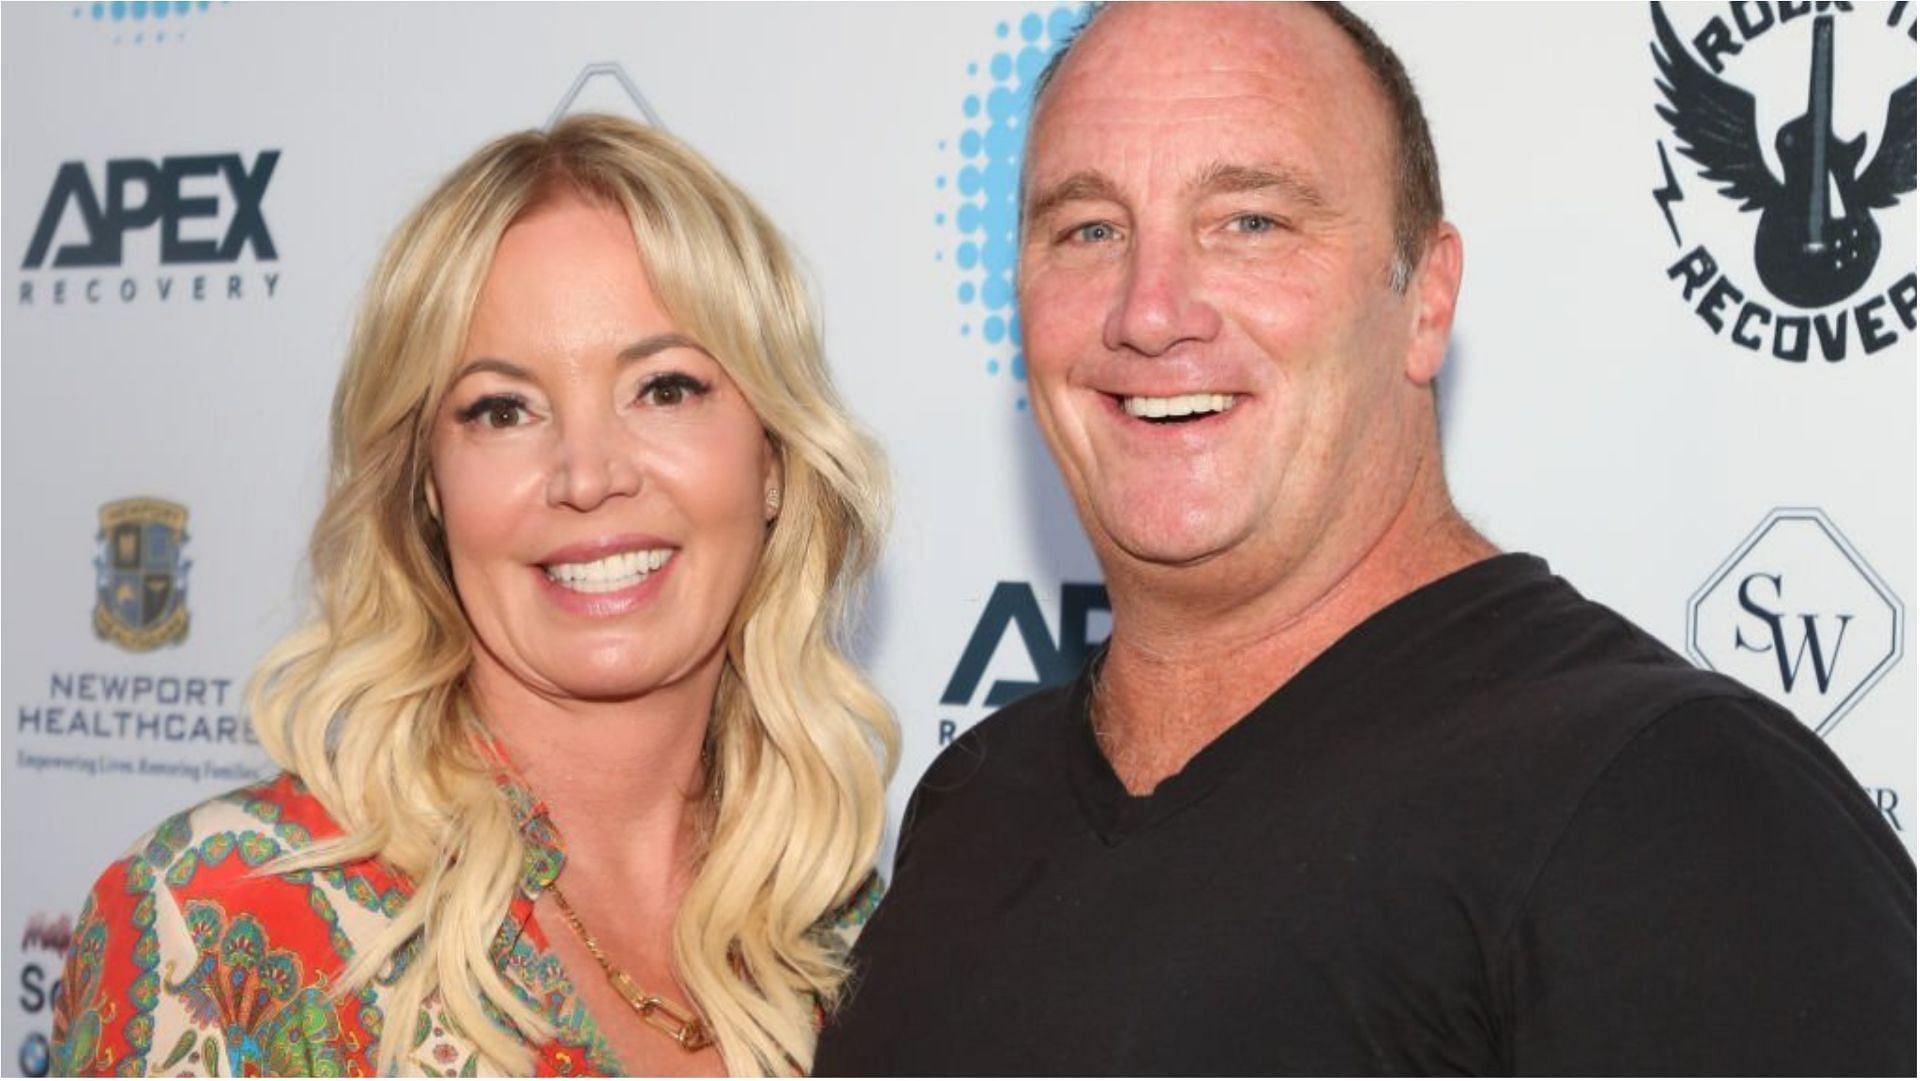 Jeanie Buss and Jay Mohr net worth Fortunes explored as Lakers owner